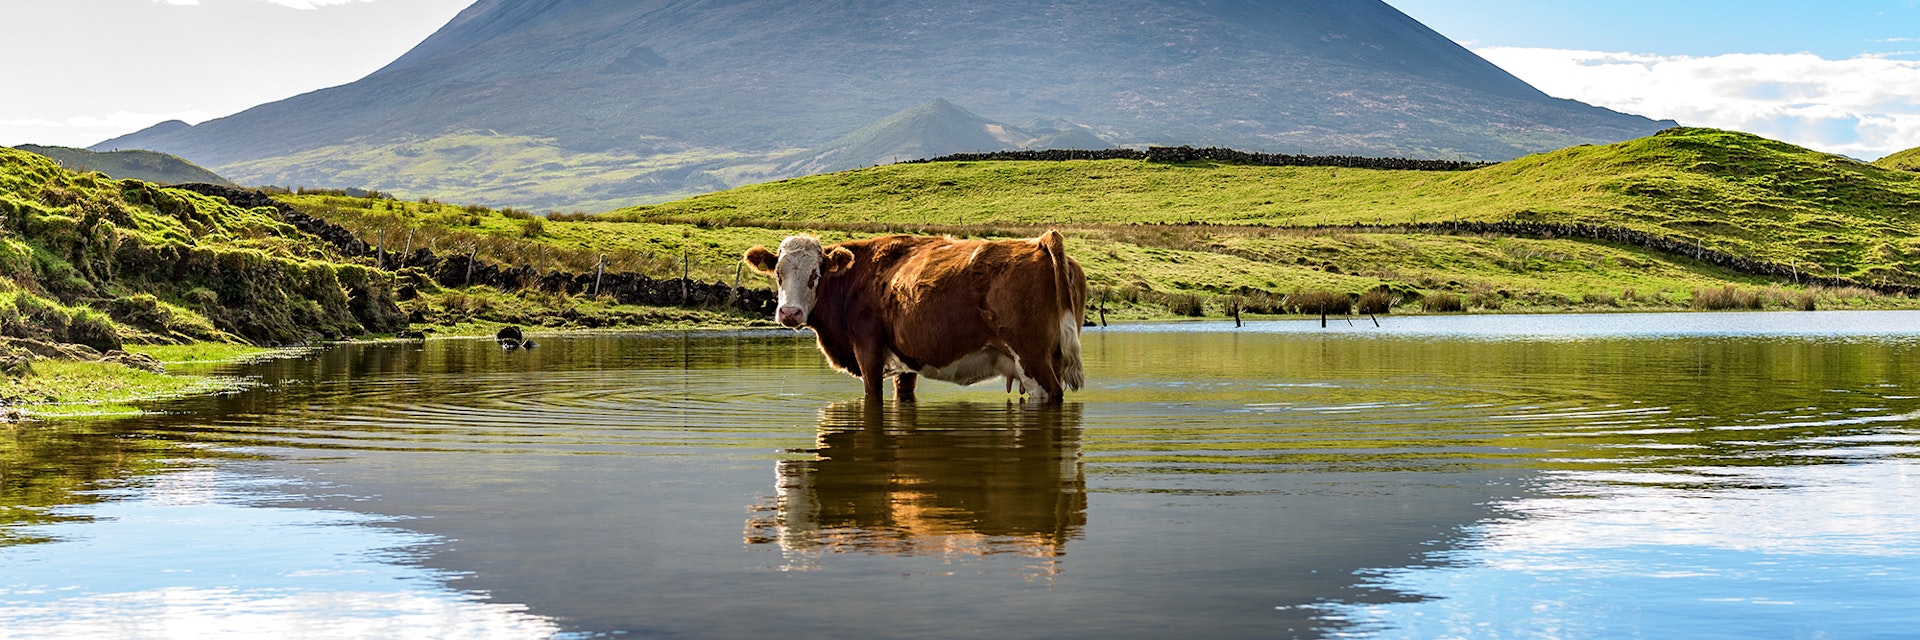 Mount Pico and a cow standing in water, reflected in a nearby lake; Shutterstock ID 378069745; Your name (First / Last): James Kay; GL account no.: 65050; Netsuite department name: Online Editorial; Full Product or Project name including edition: Azores destination page highlights